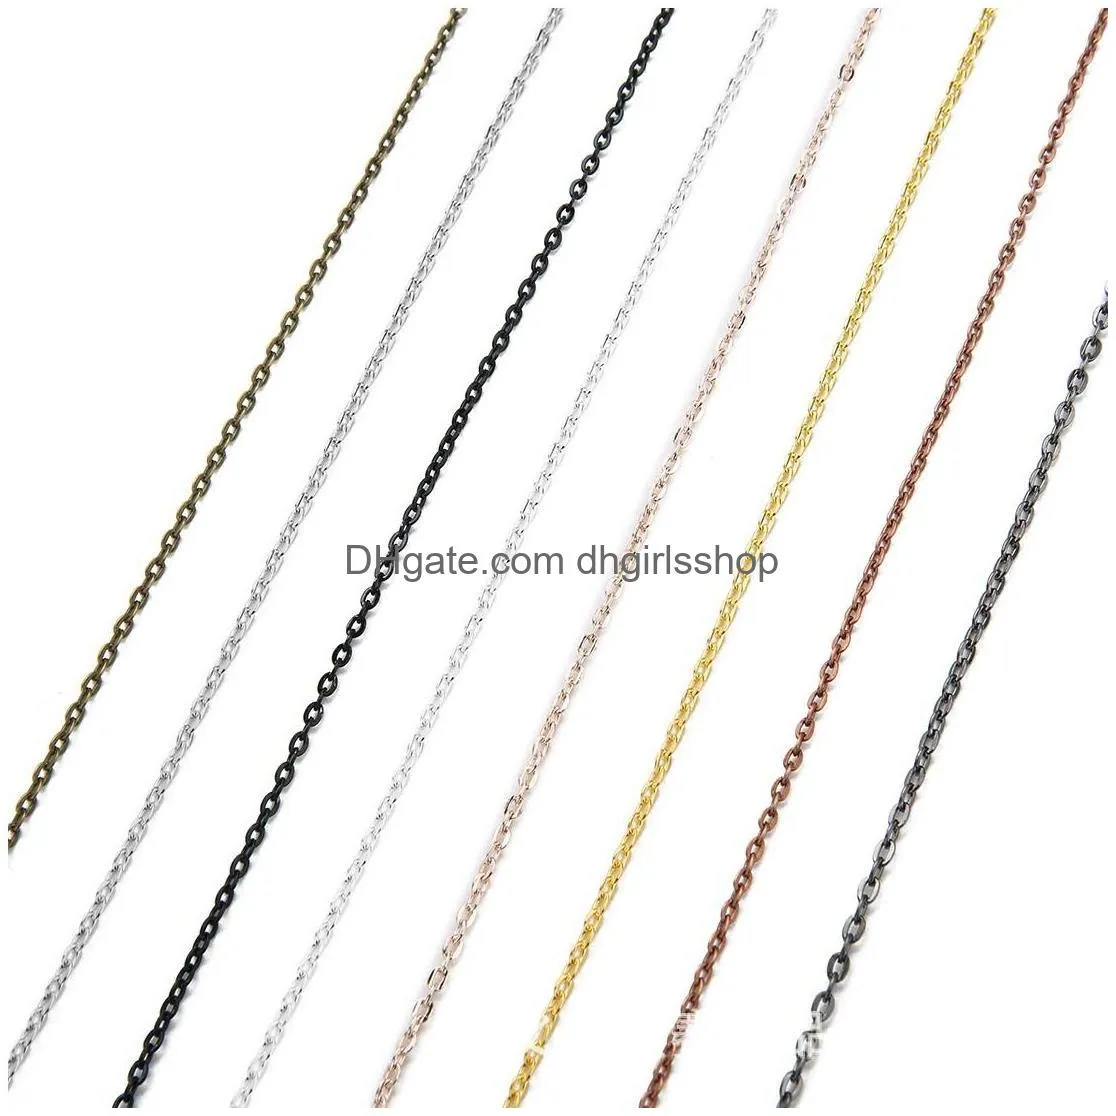 Chains 10Yards 2Xm Rolo Link Chains Sier Rose Gold Bronze Black Metal O Chain Rolls For Necklaces Earrings Bracelets Diy Jewelry Makin Dhpg8